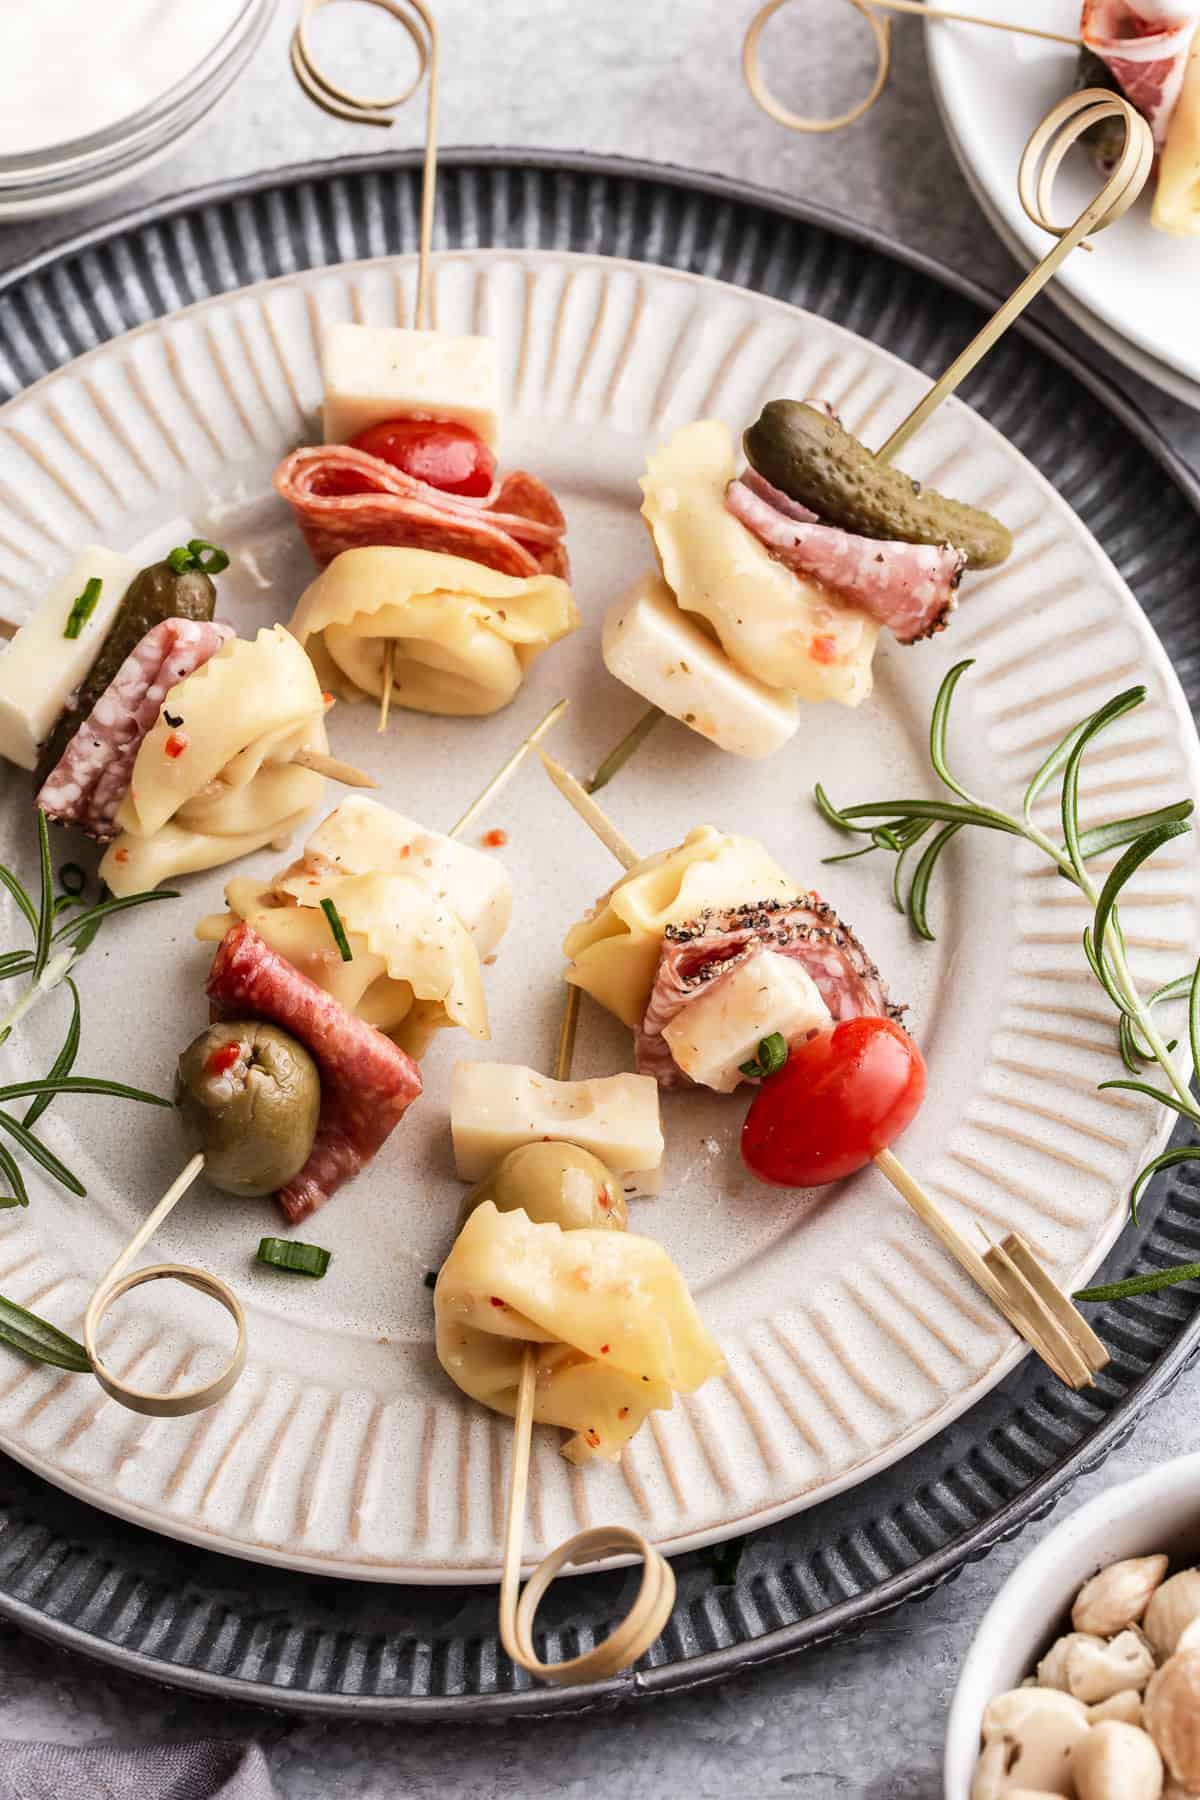 small skewers with tortellini, meats, cheese and pickled veggies, on tan plate.